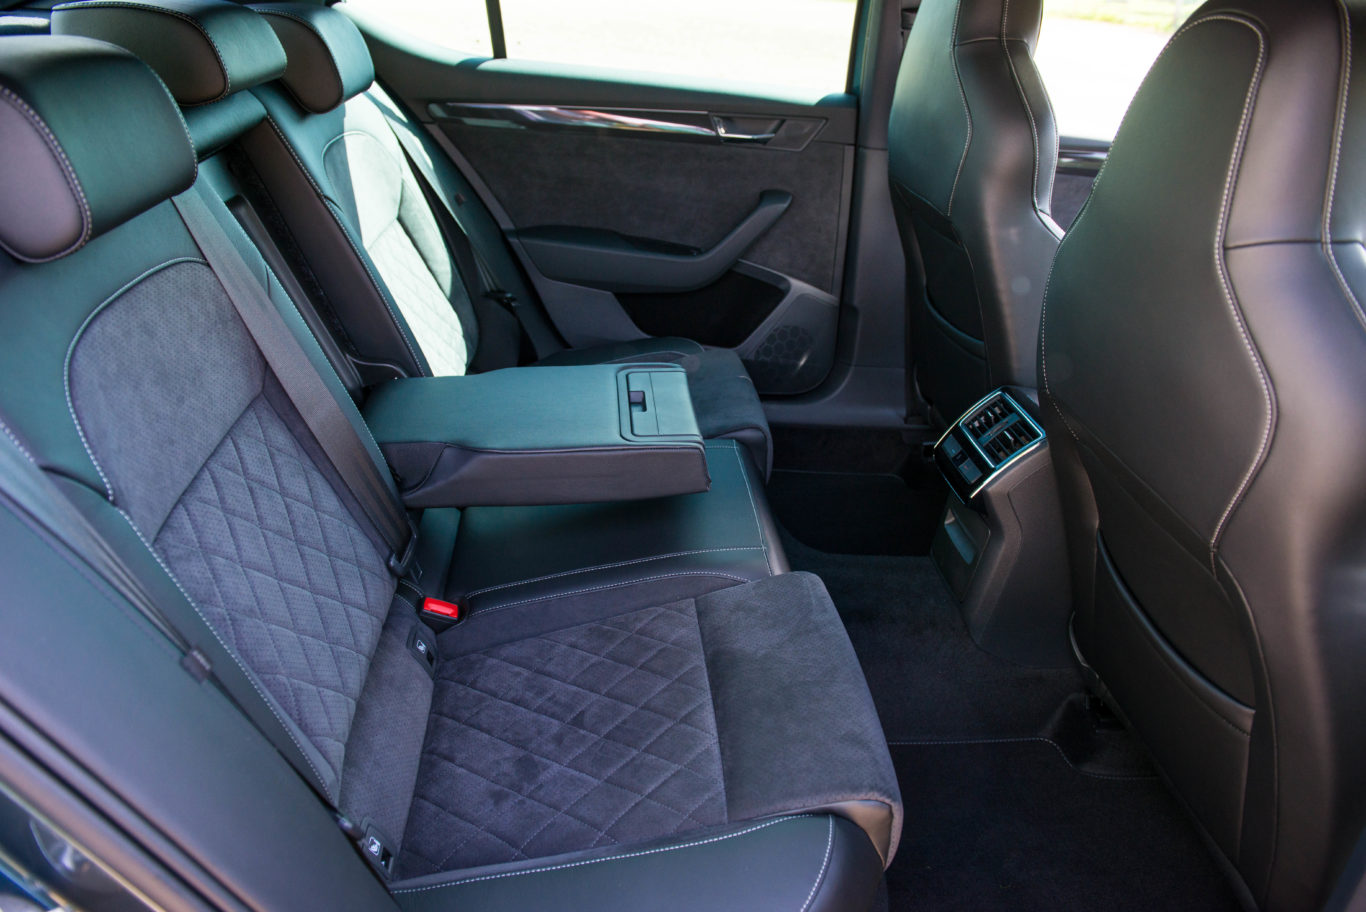 The rear seats offer up plenty of space